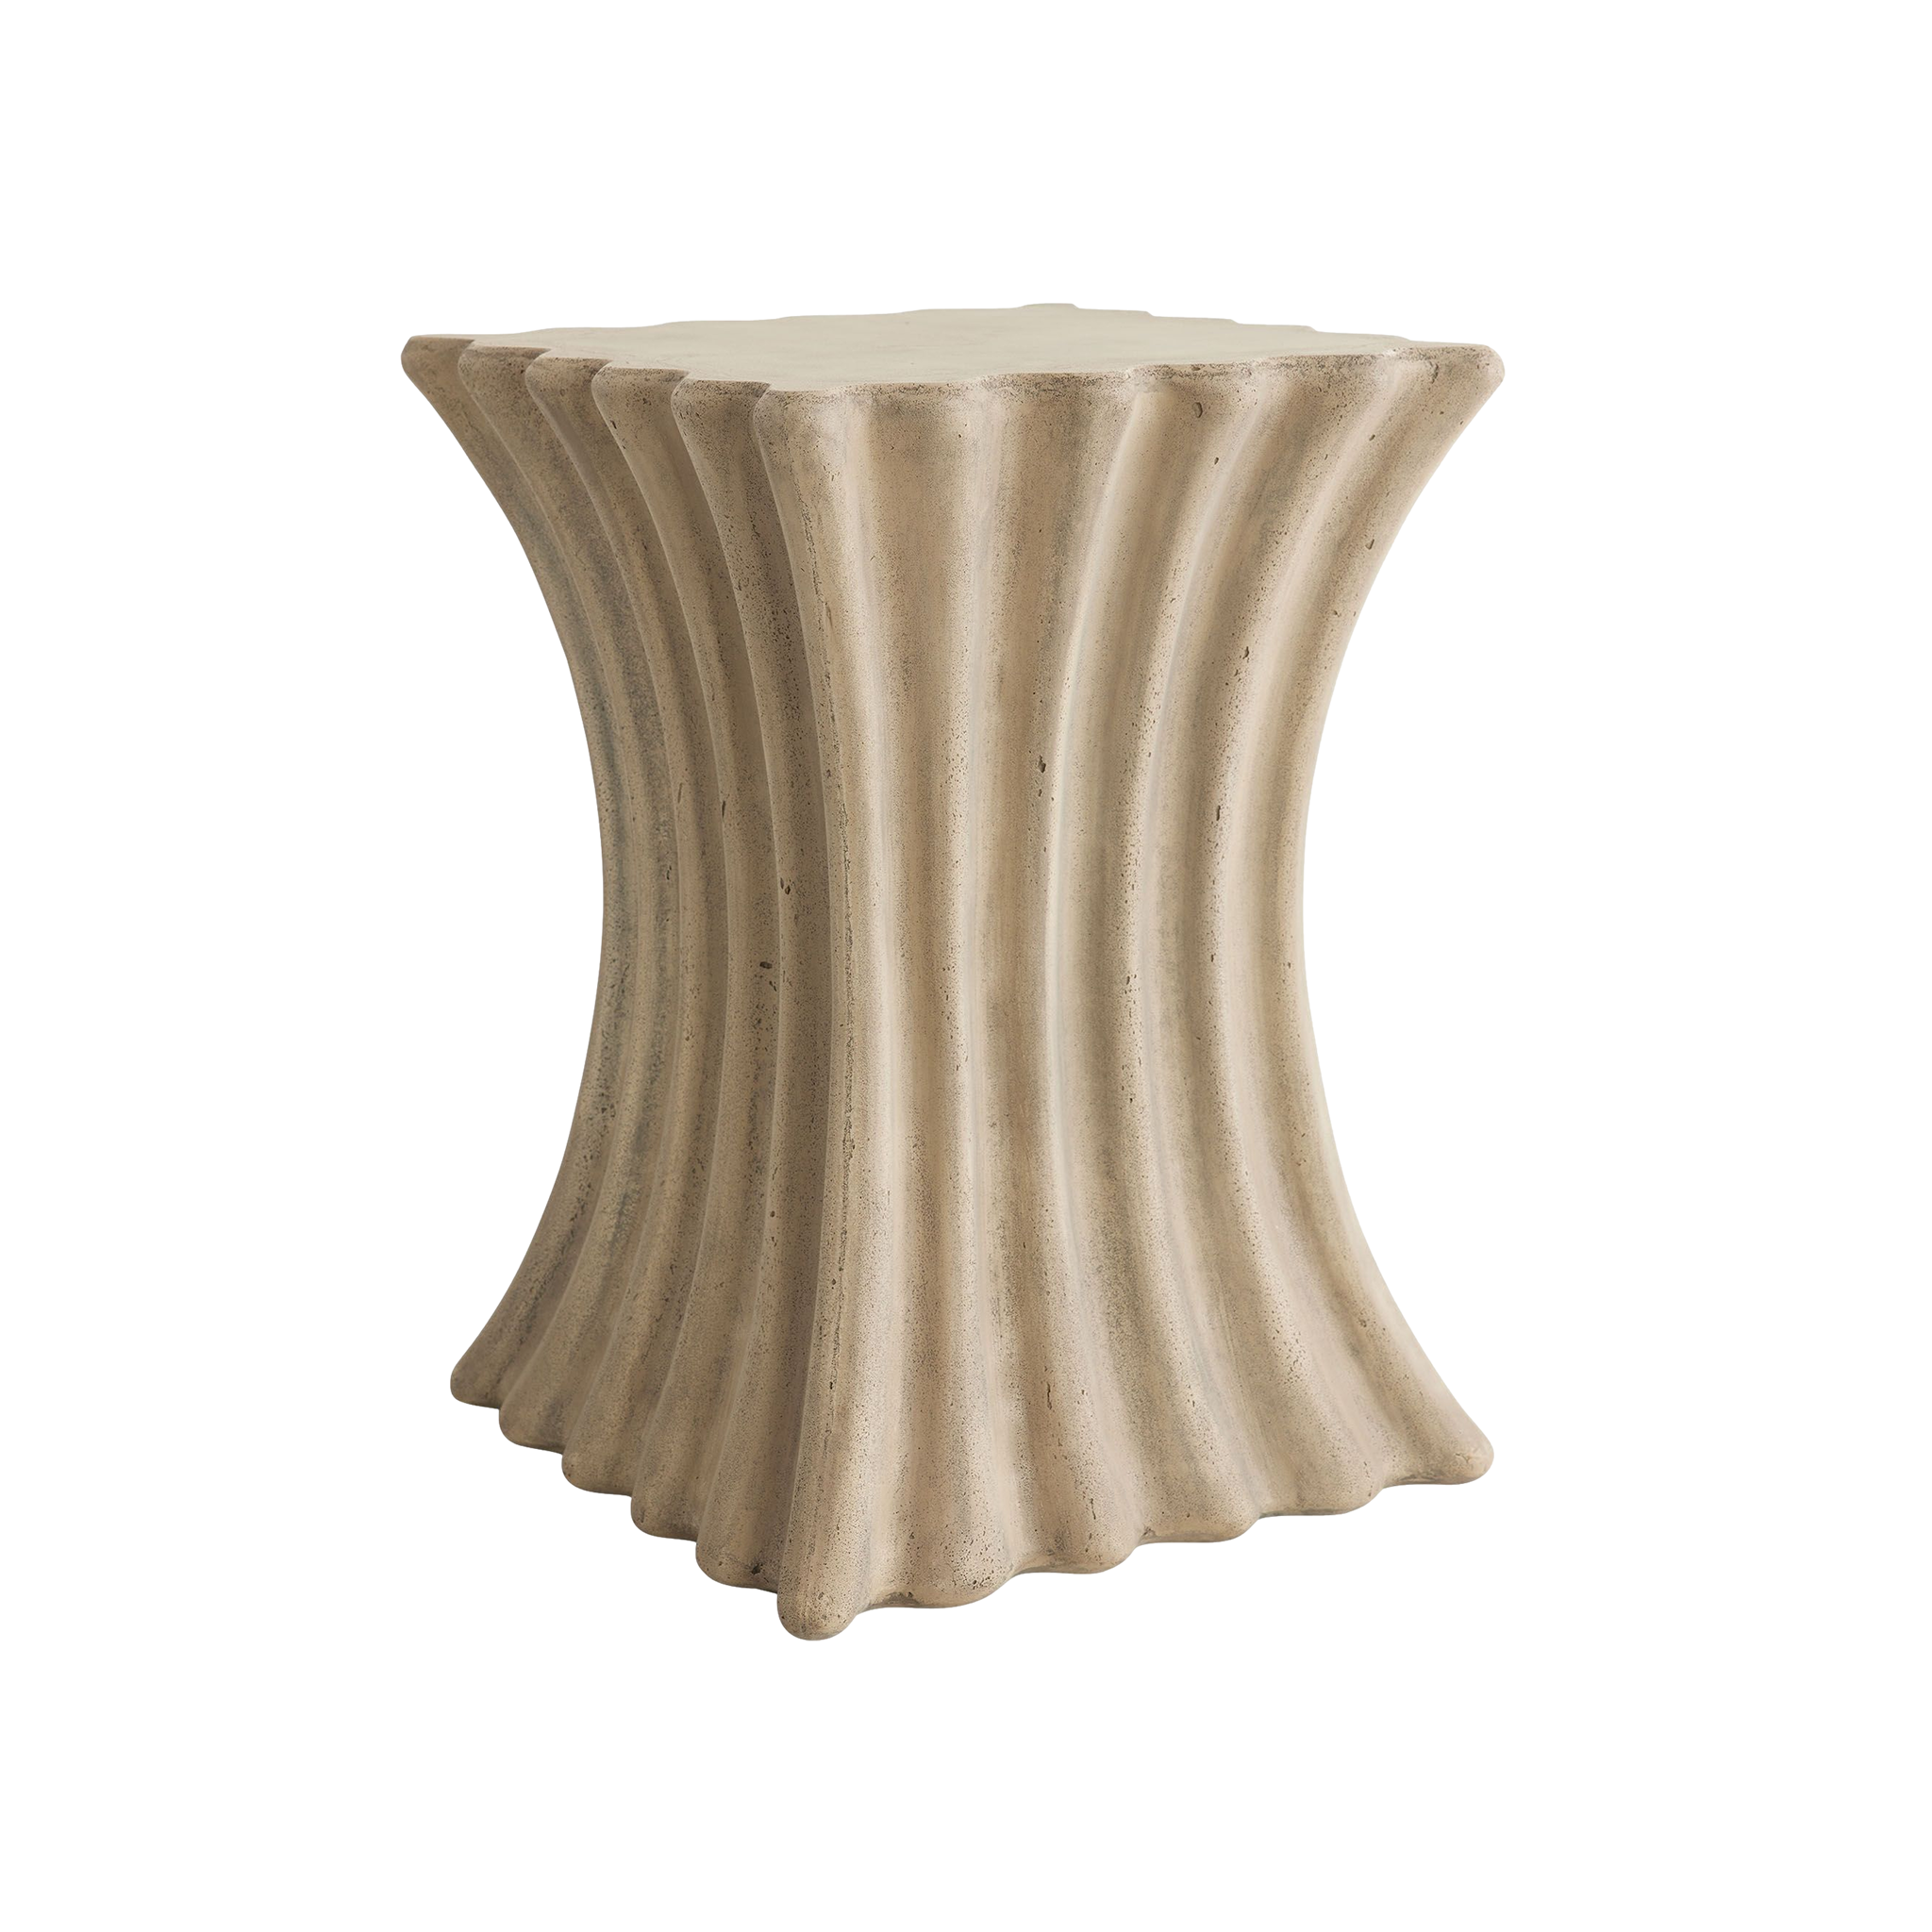 Wave Accent Table